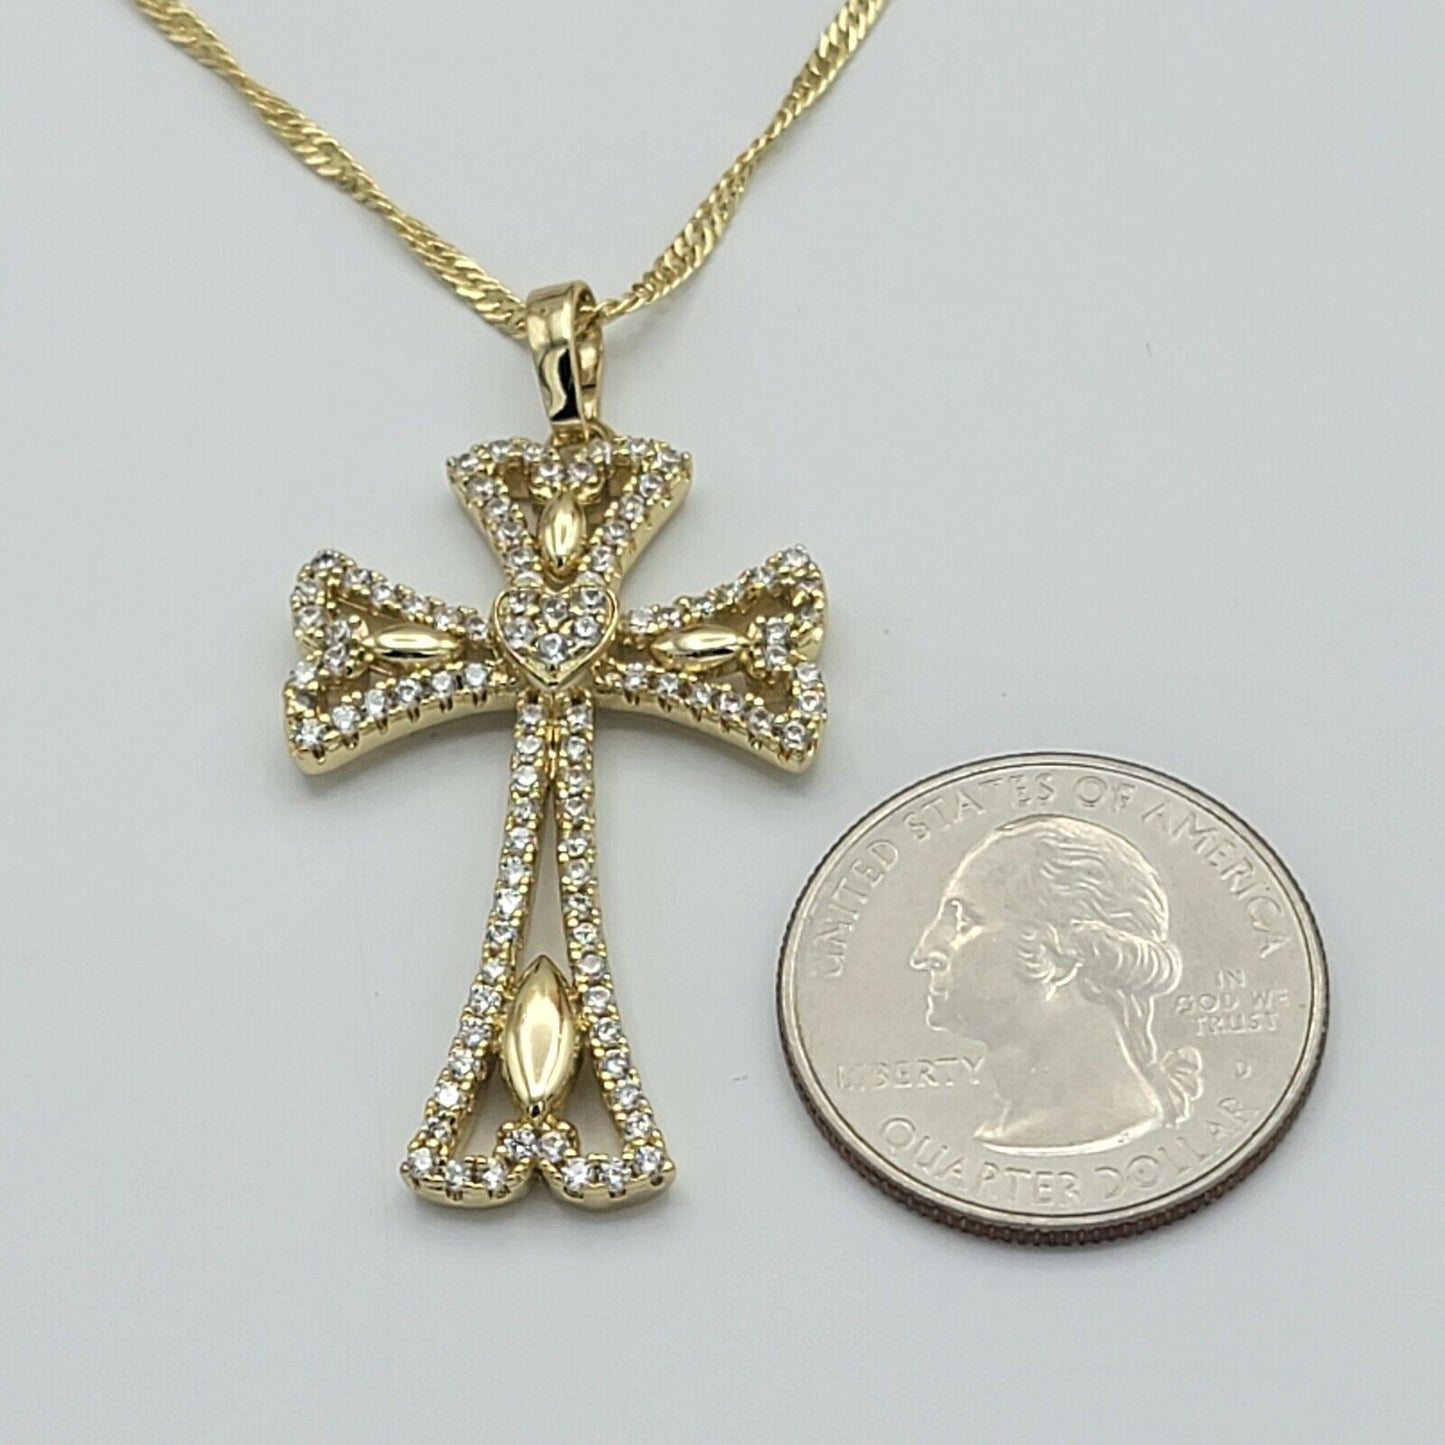 Necklaces - 14K Gold Plated. Icy Crystal CROSS HEART Pendant & Chain.